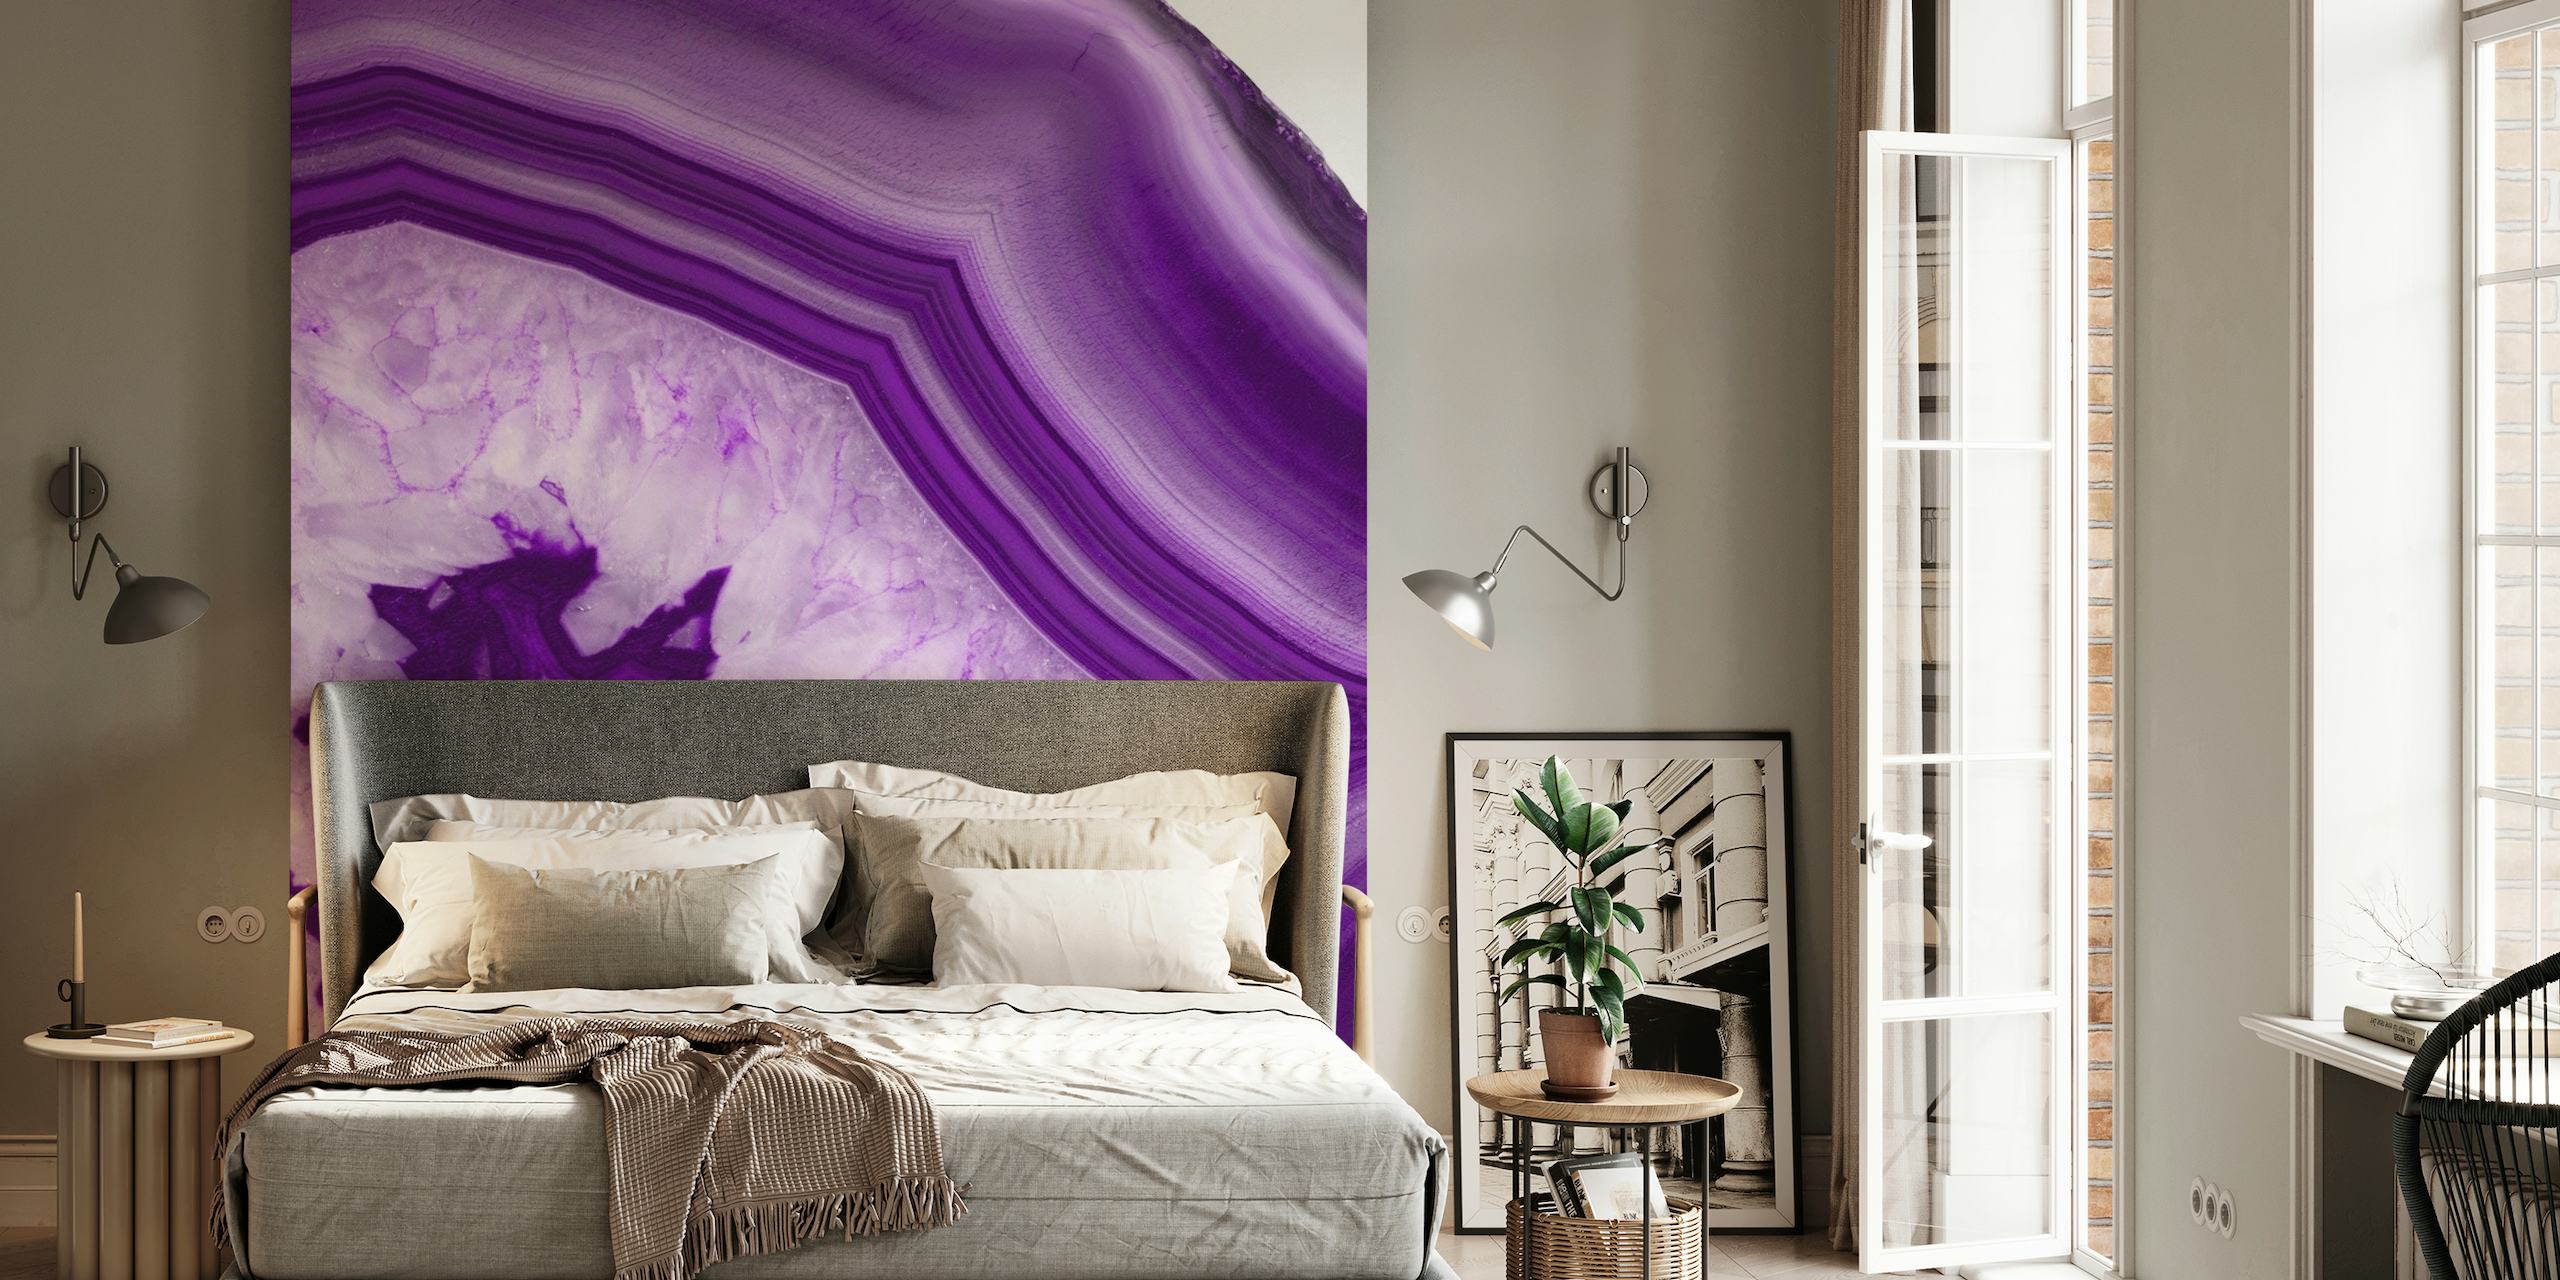 Purple agate stone pattern wall mural with vivid purple and white bands